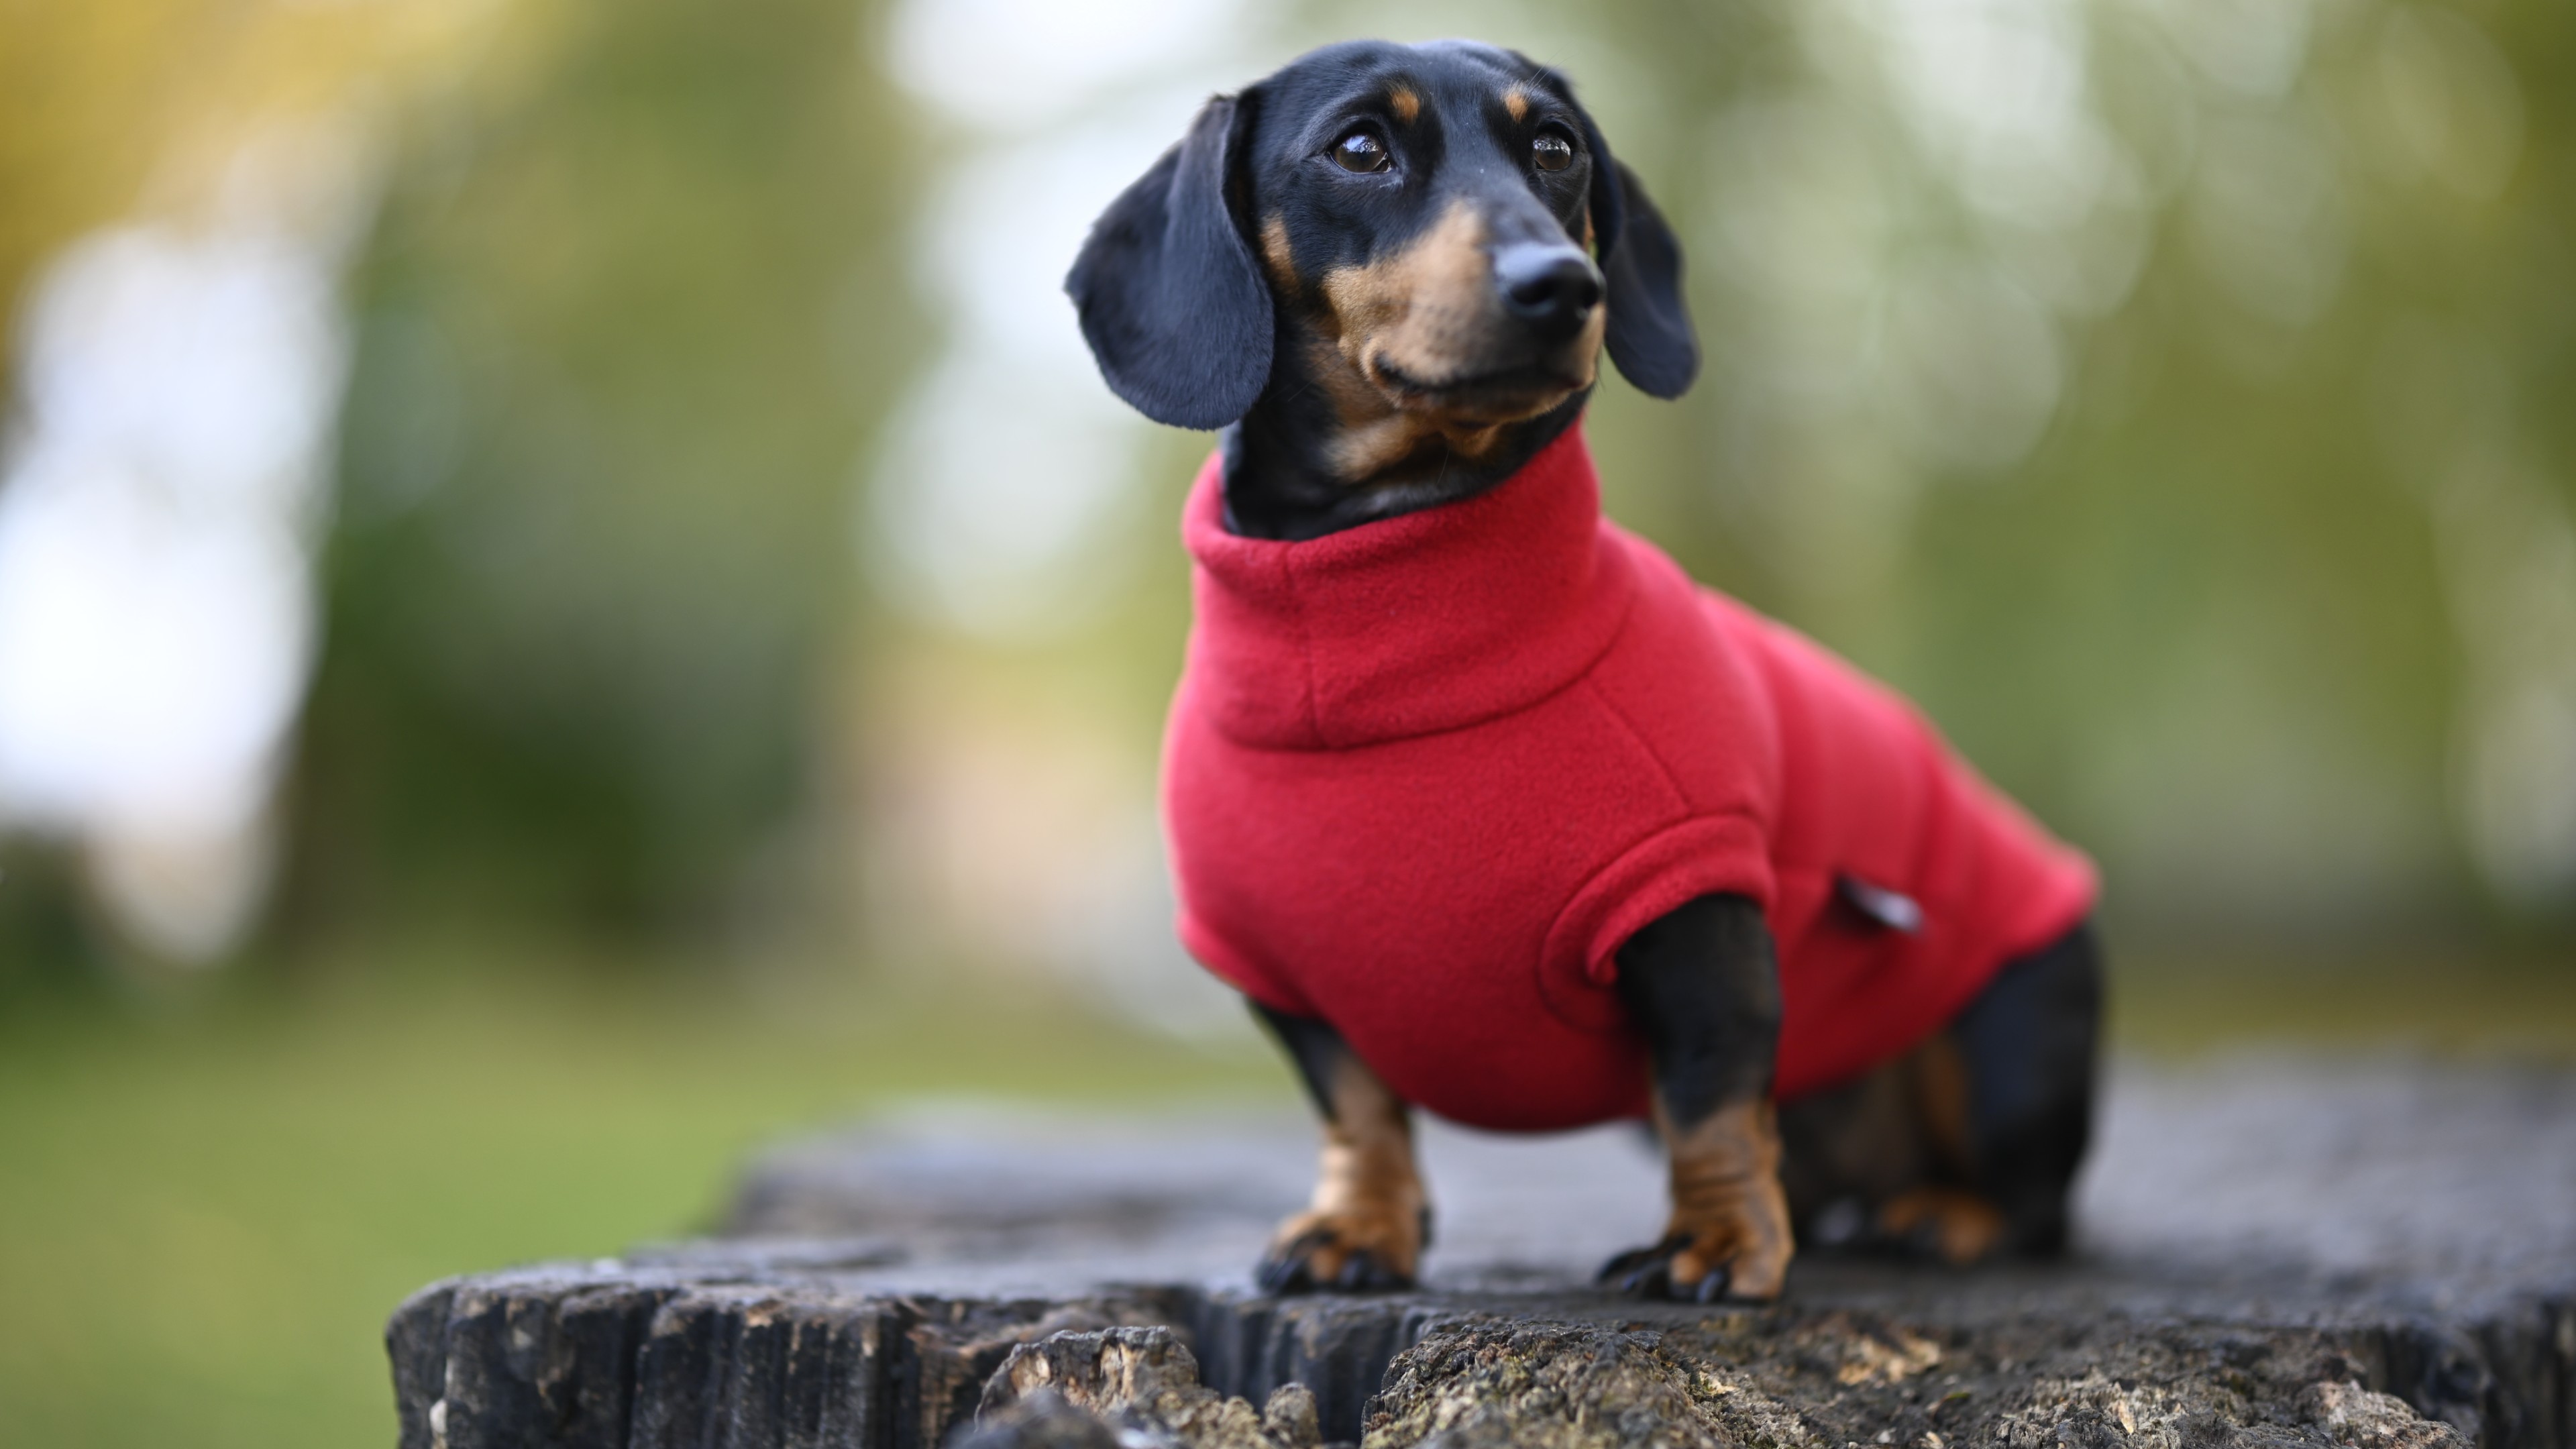 Dog Snowsuit with Adjustable Bands Sizes Geyecete Dog Jacket Dog Winter Coat with Padded Fleece Lining and high Collar Dog Coat Perfect for Dachshunds